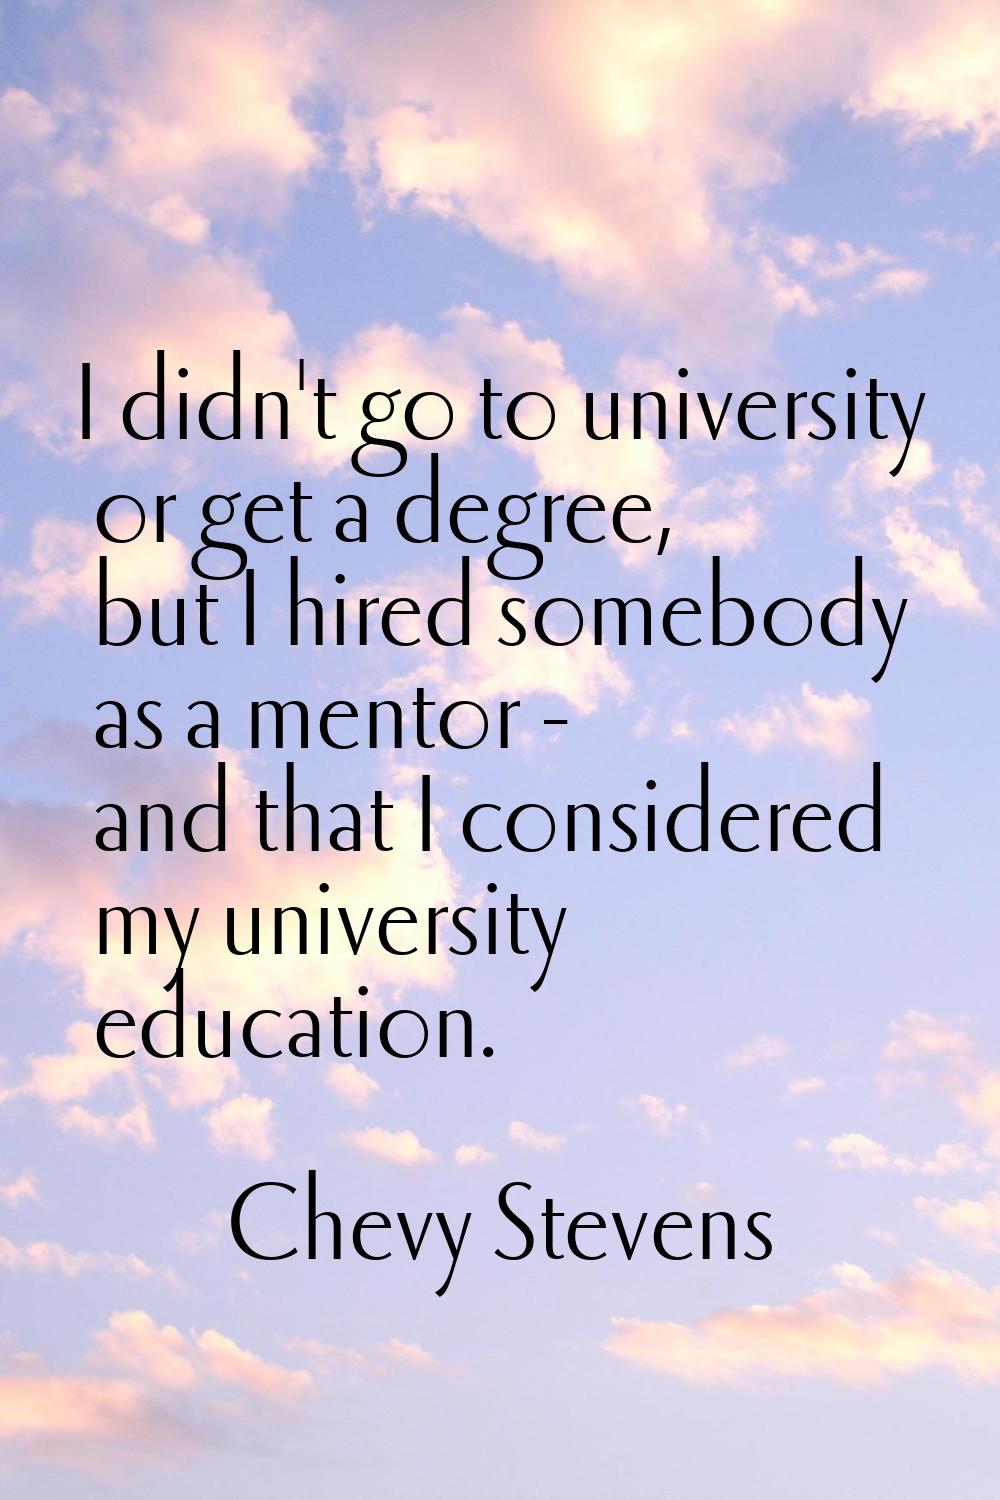 I didn't go to university or get a degree, but I hired somebody as a mentor - and that I considered